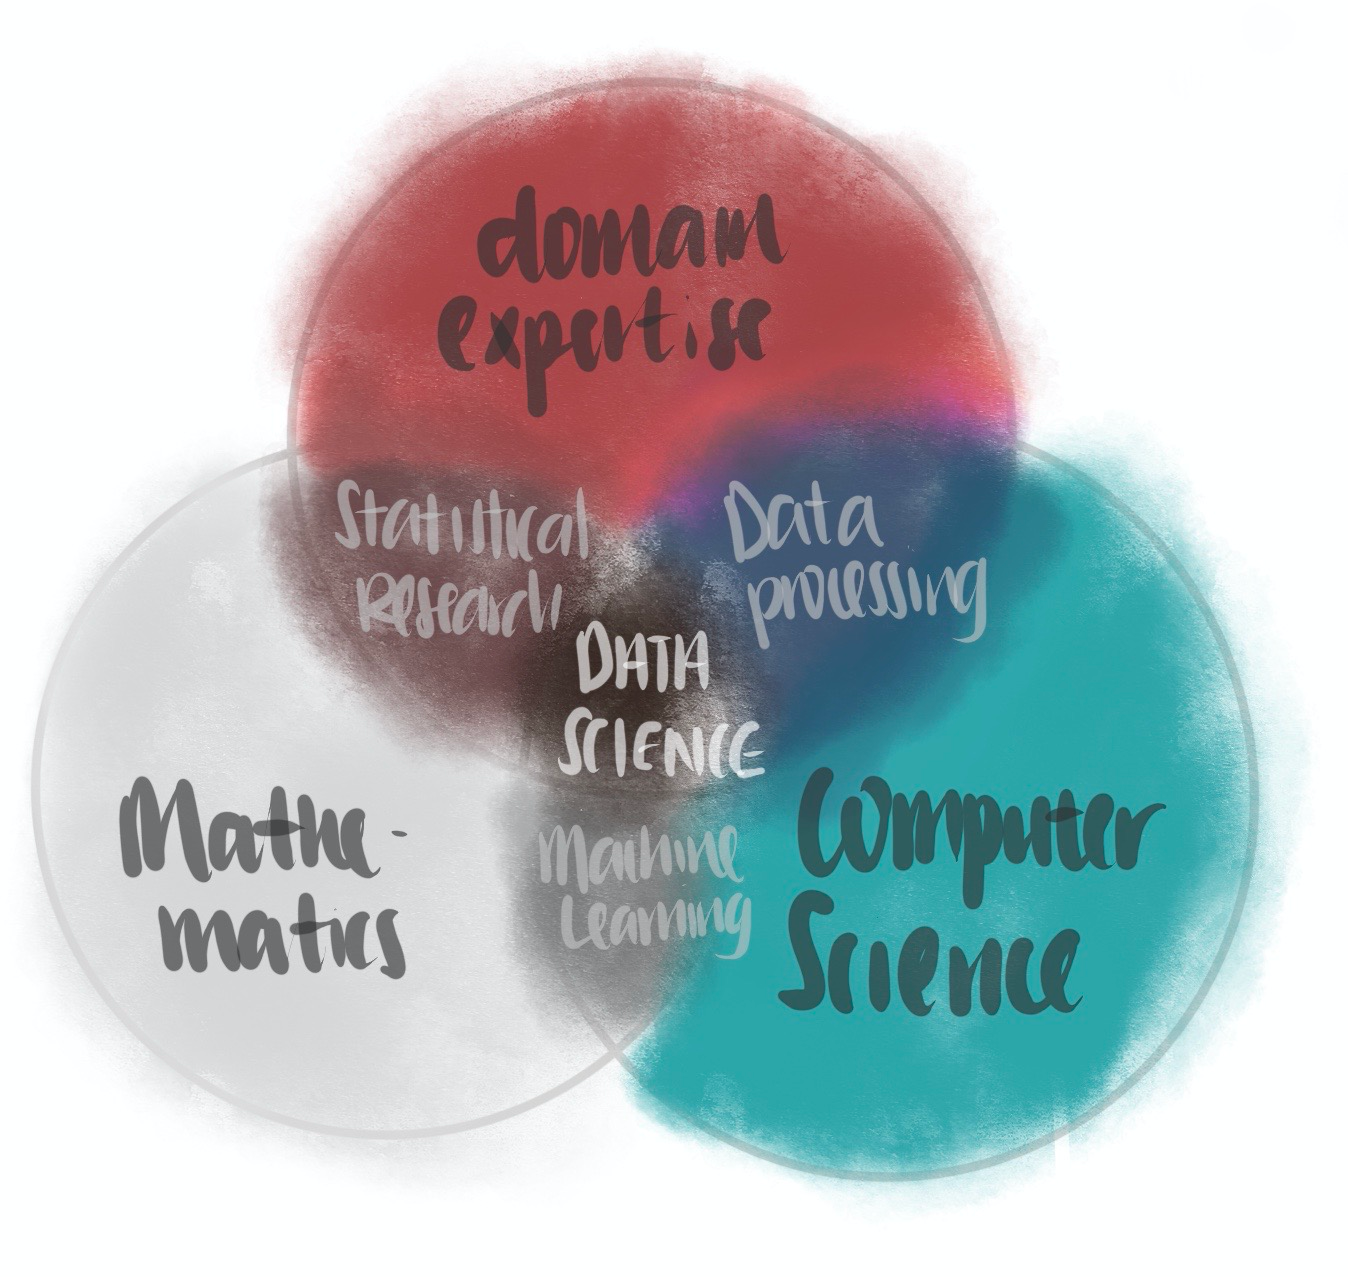 Data science is in the intersection of computer science, mathematics, domain expertise, machine learning and data processing.